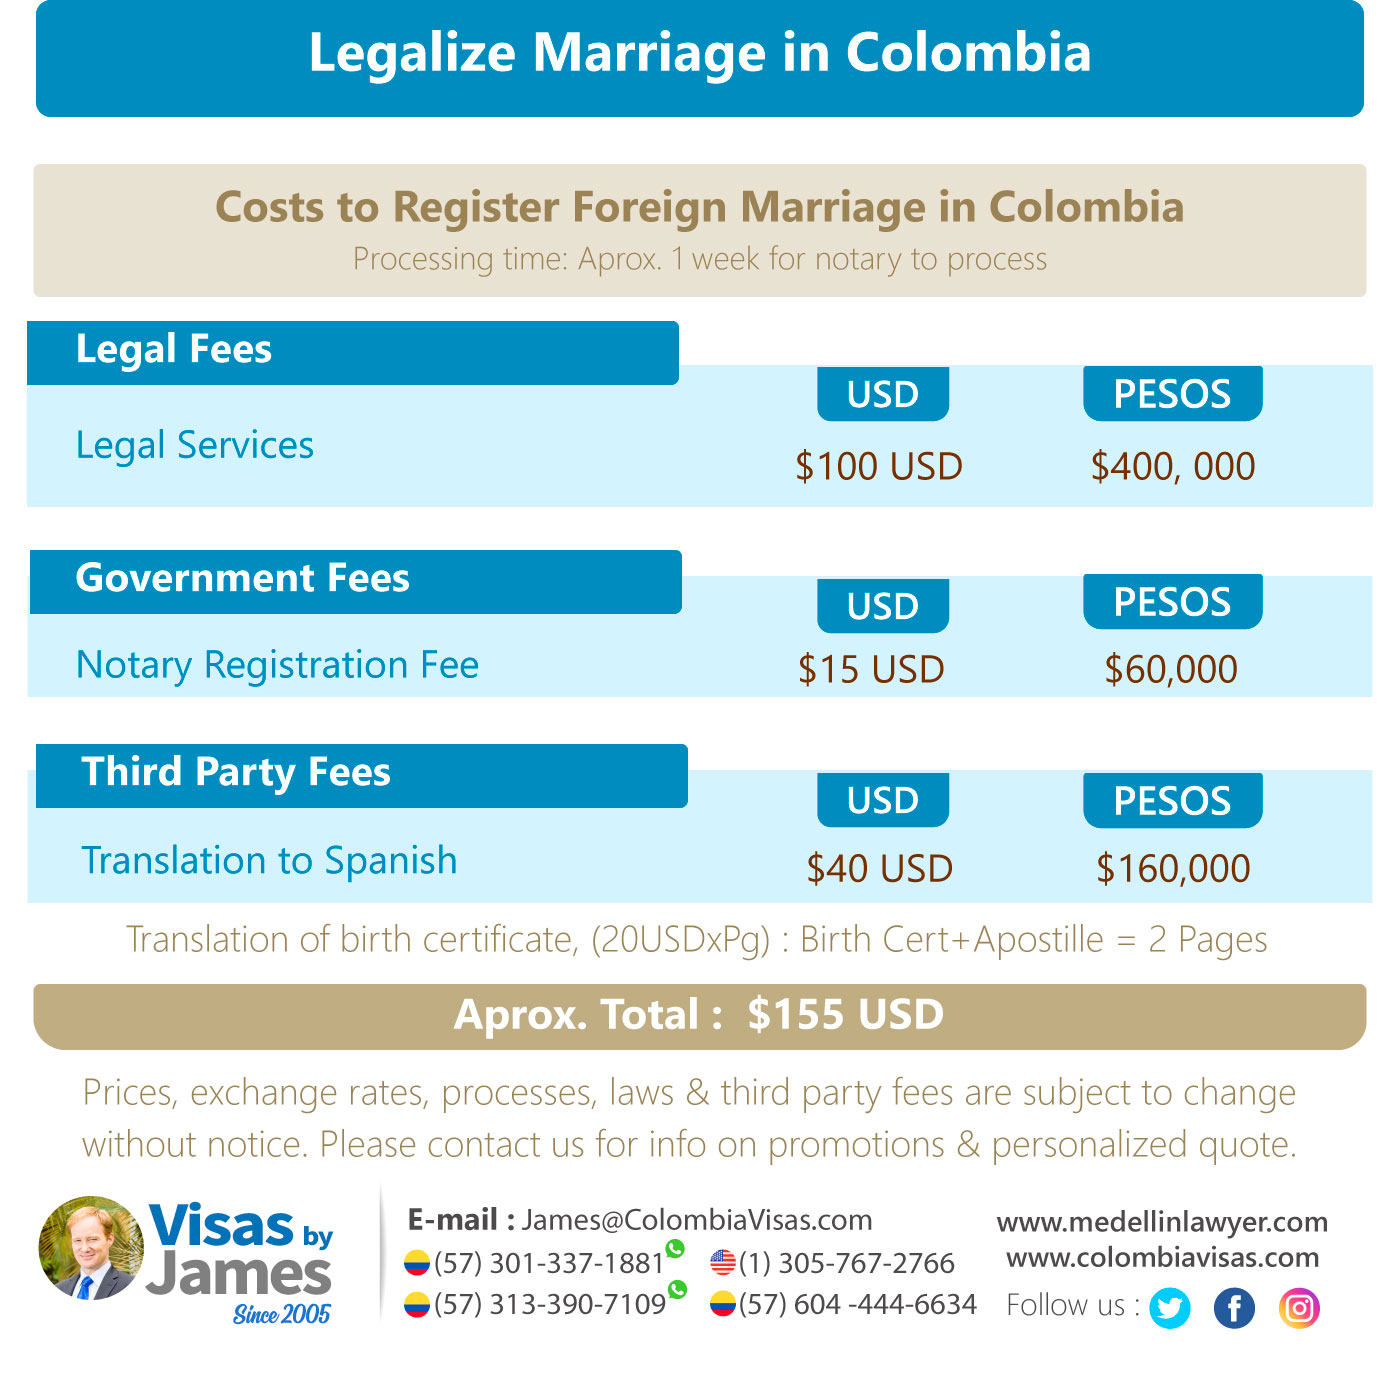 Legalize-Marriage-in-Colombia